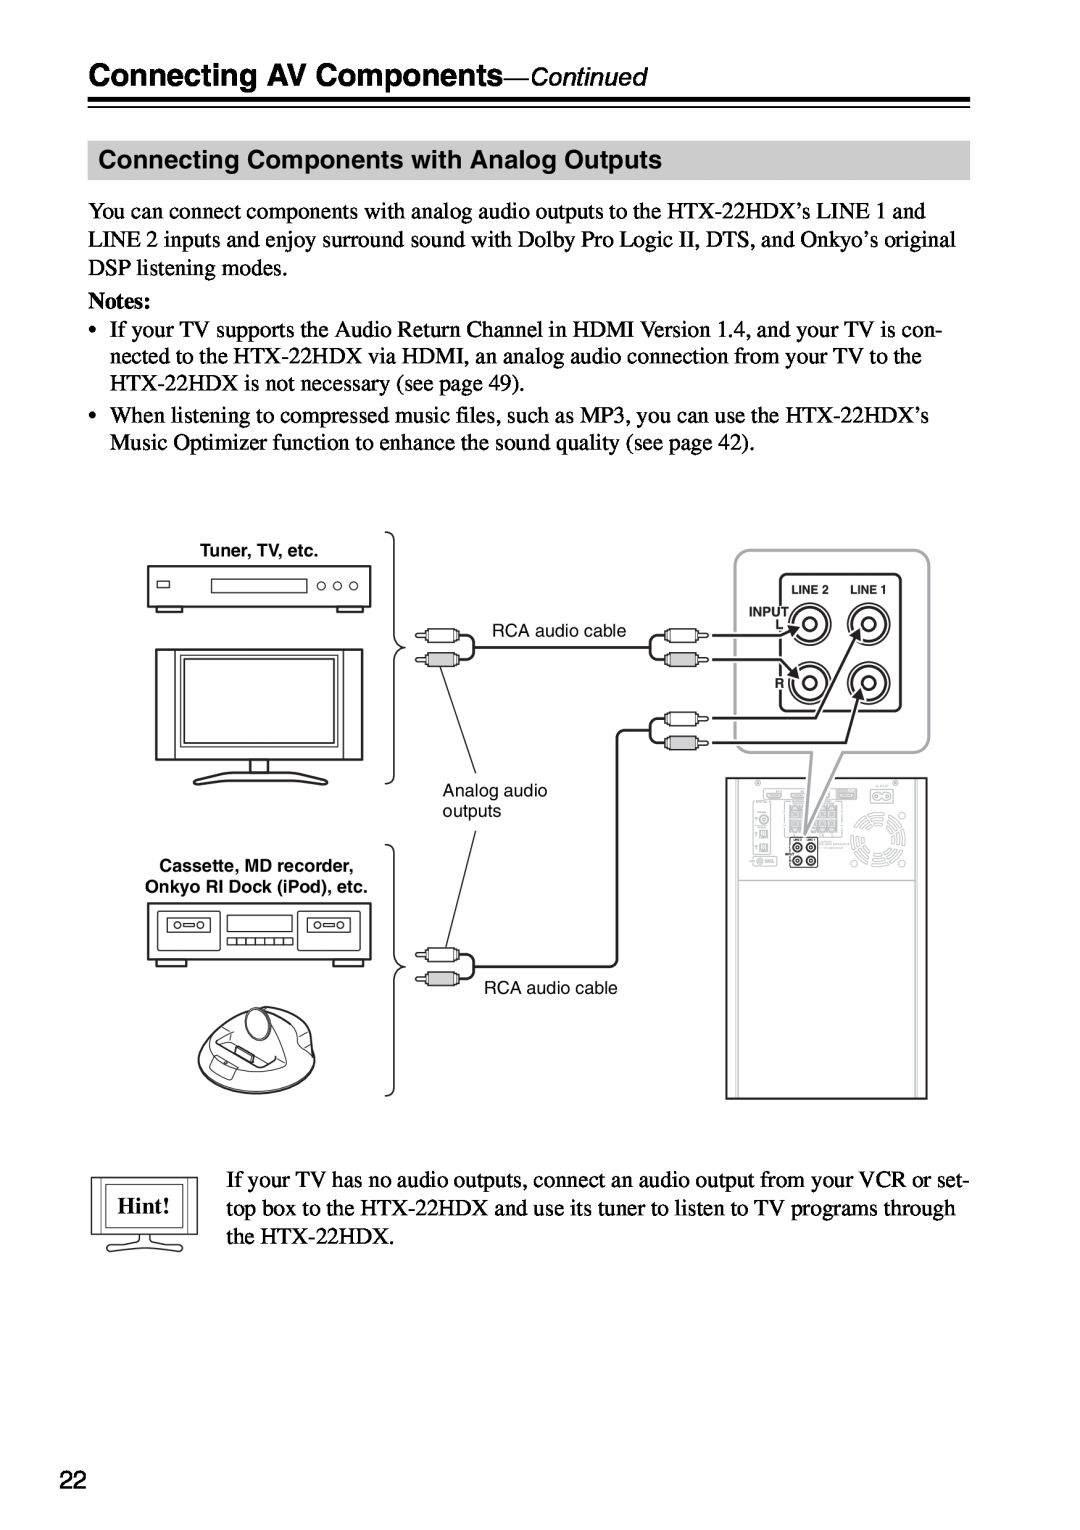 Onkyo HTX-22HDXPAW Connecting Components with Analog Outputs, Connecting AV Components-Continued, Tuner, TV, etc 